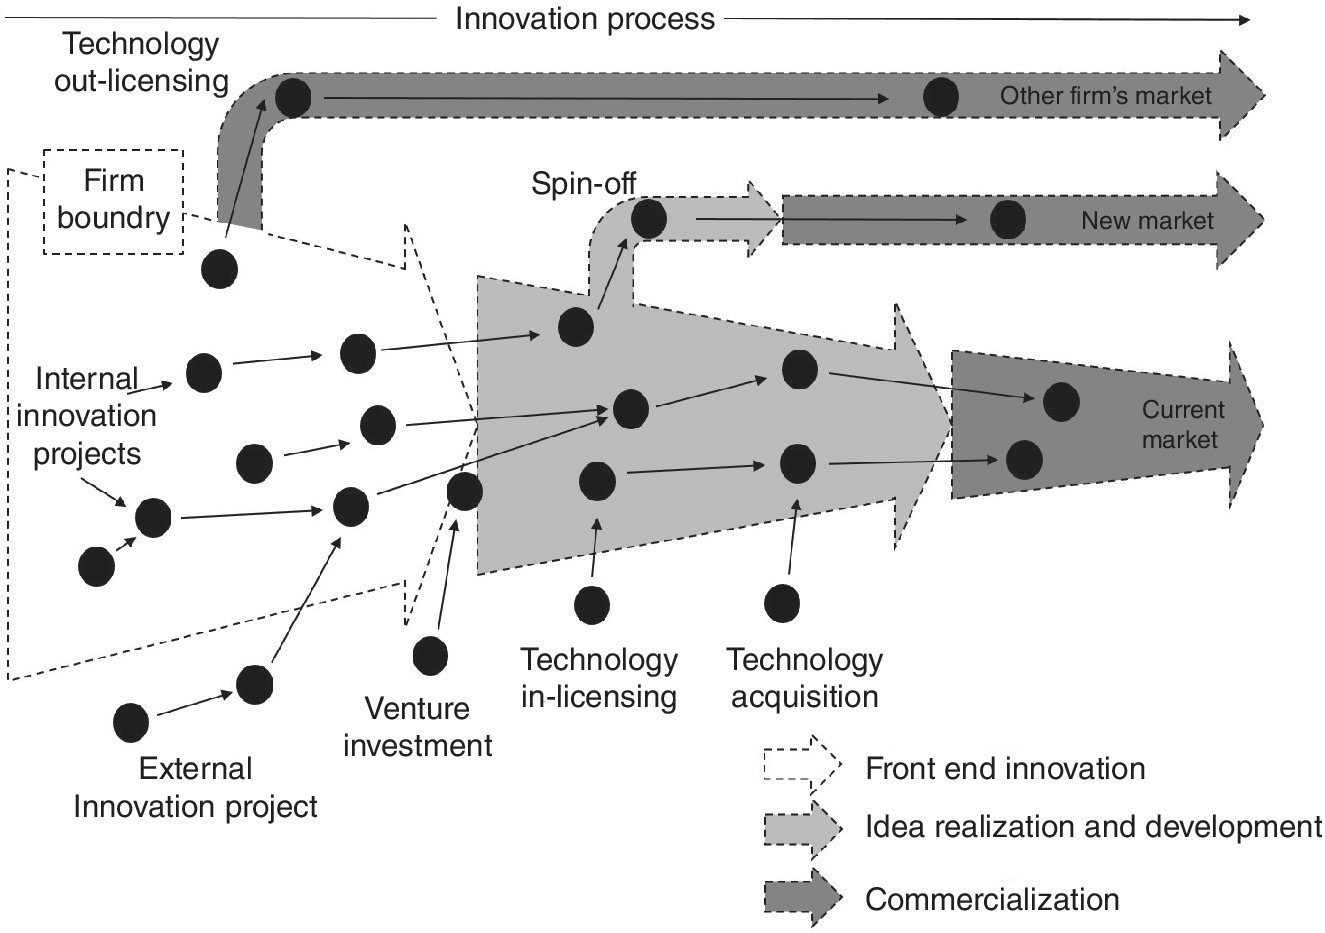 An open innovation model displaying 6 thick rightward arrows representing front end innovation, idea realization and development, and commercialization, with scattered solid circles connected by thin arrows.